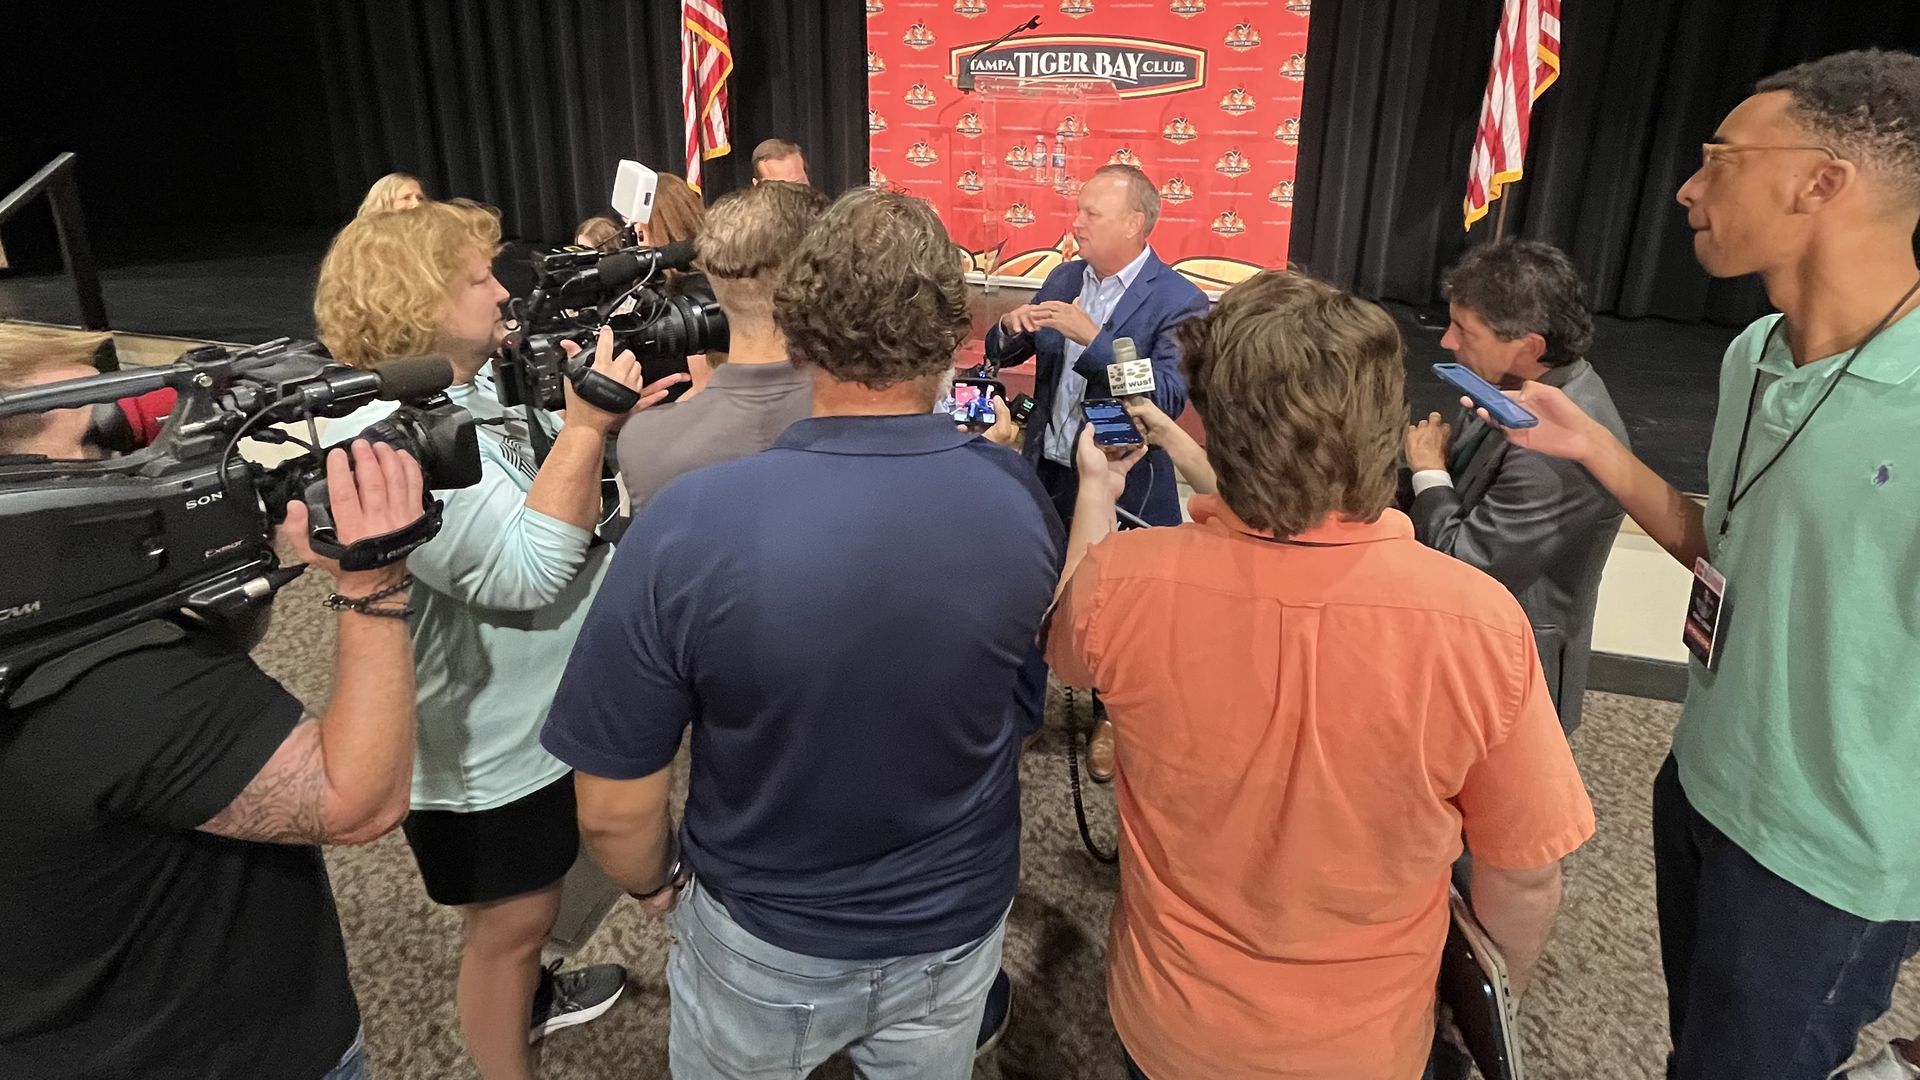 A man surrounded by reporters holding microphones and cameras. In the background, a red poster says "Tampa Tiger Bay Club."